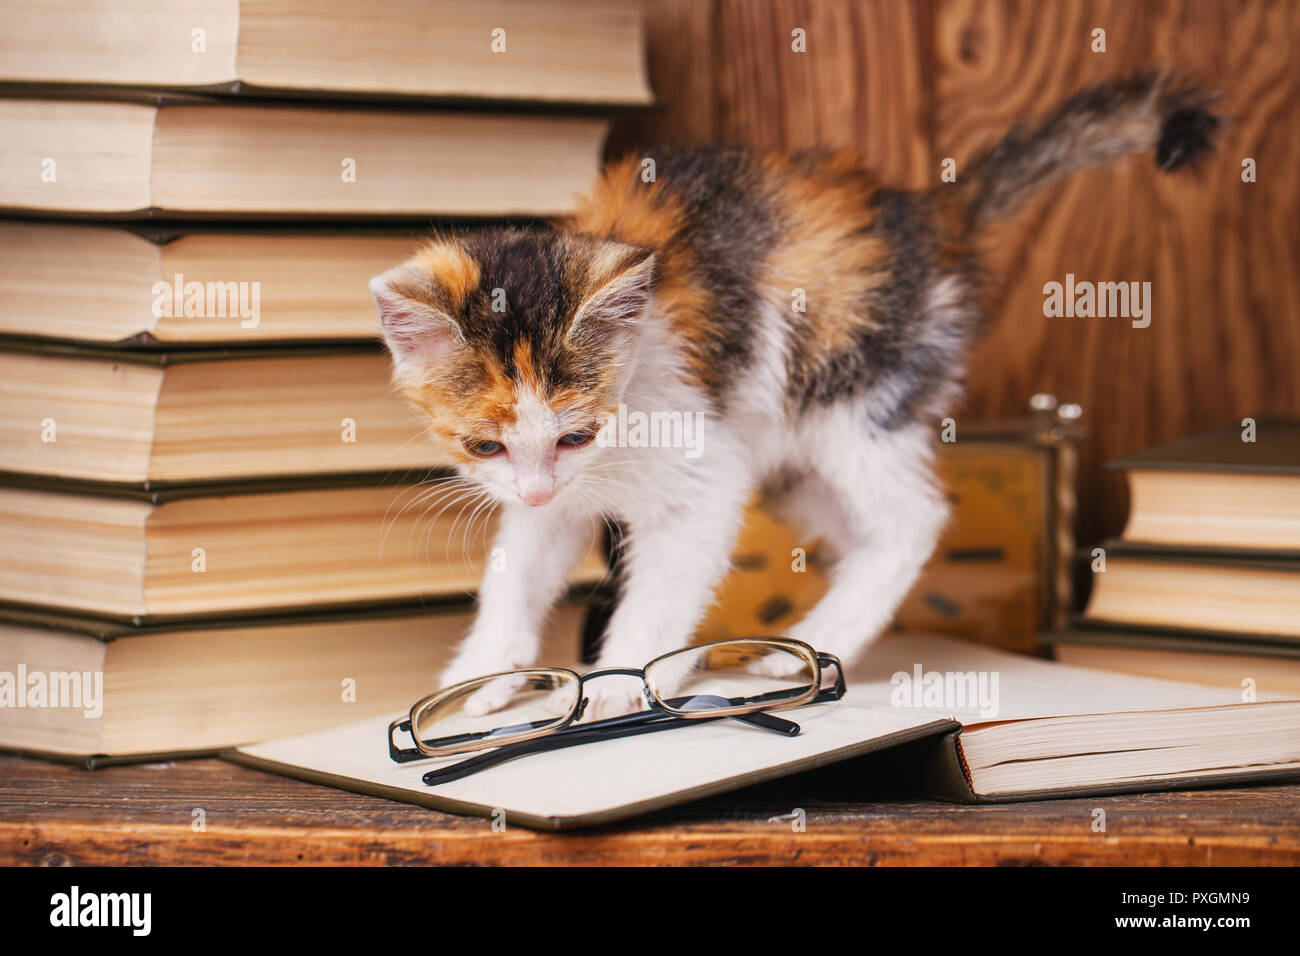 The cat is played with eyepieces lying on the book Stock Photo